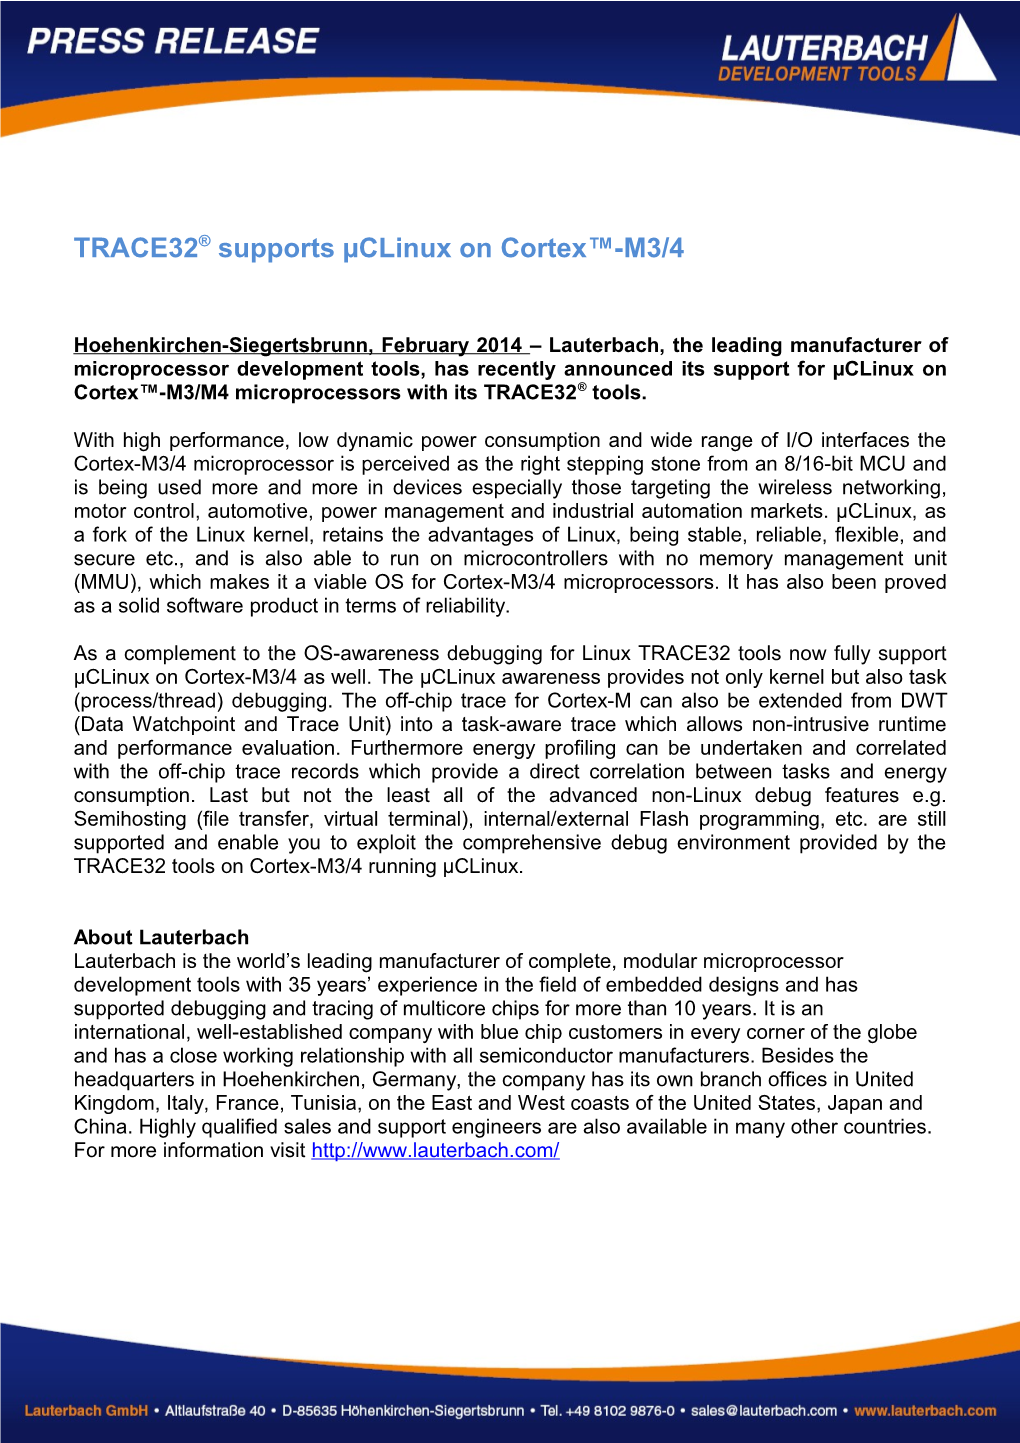 TRACE32 Supports Μclinux on Cortex -M3/4